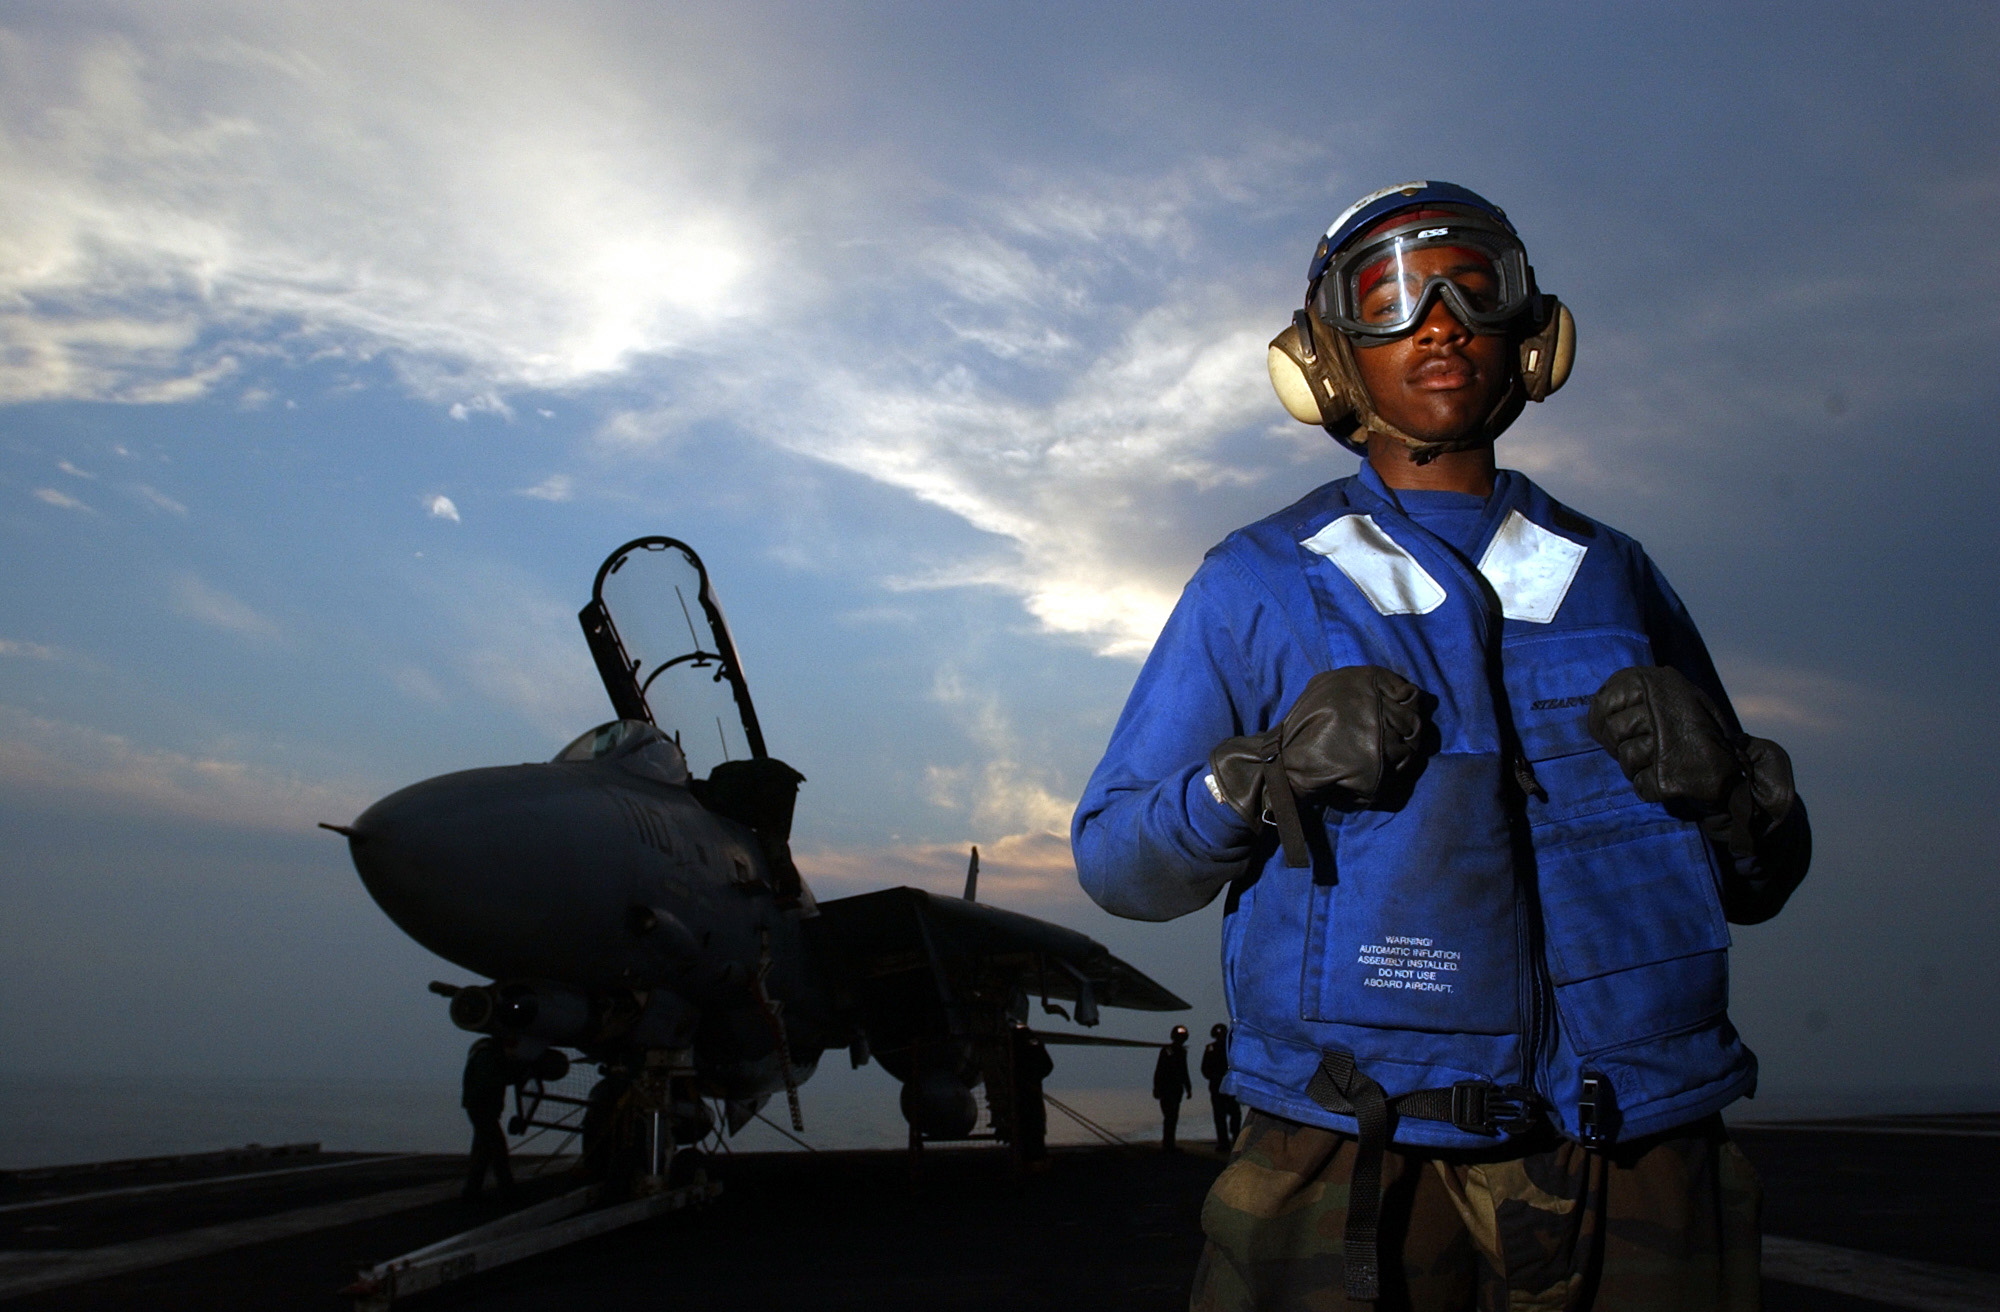 US Navy 021031-N-4309A-017 Flight deck crew aboard the nuclear powered aircraft carrier USS Abraham Lincoln (CVN 72), watches the sun set as they wait for night flight deck operations to begin